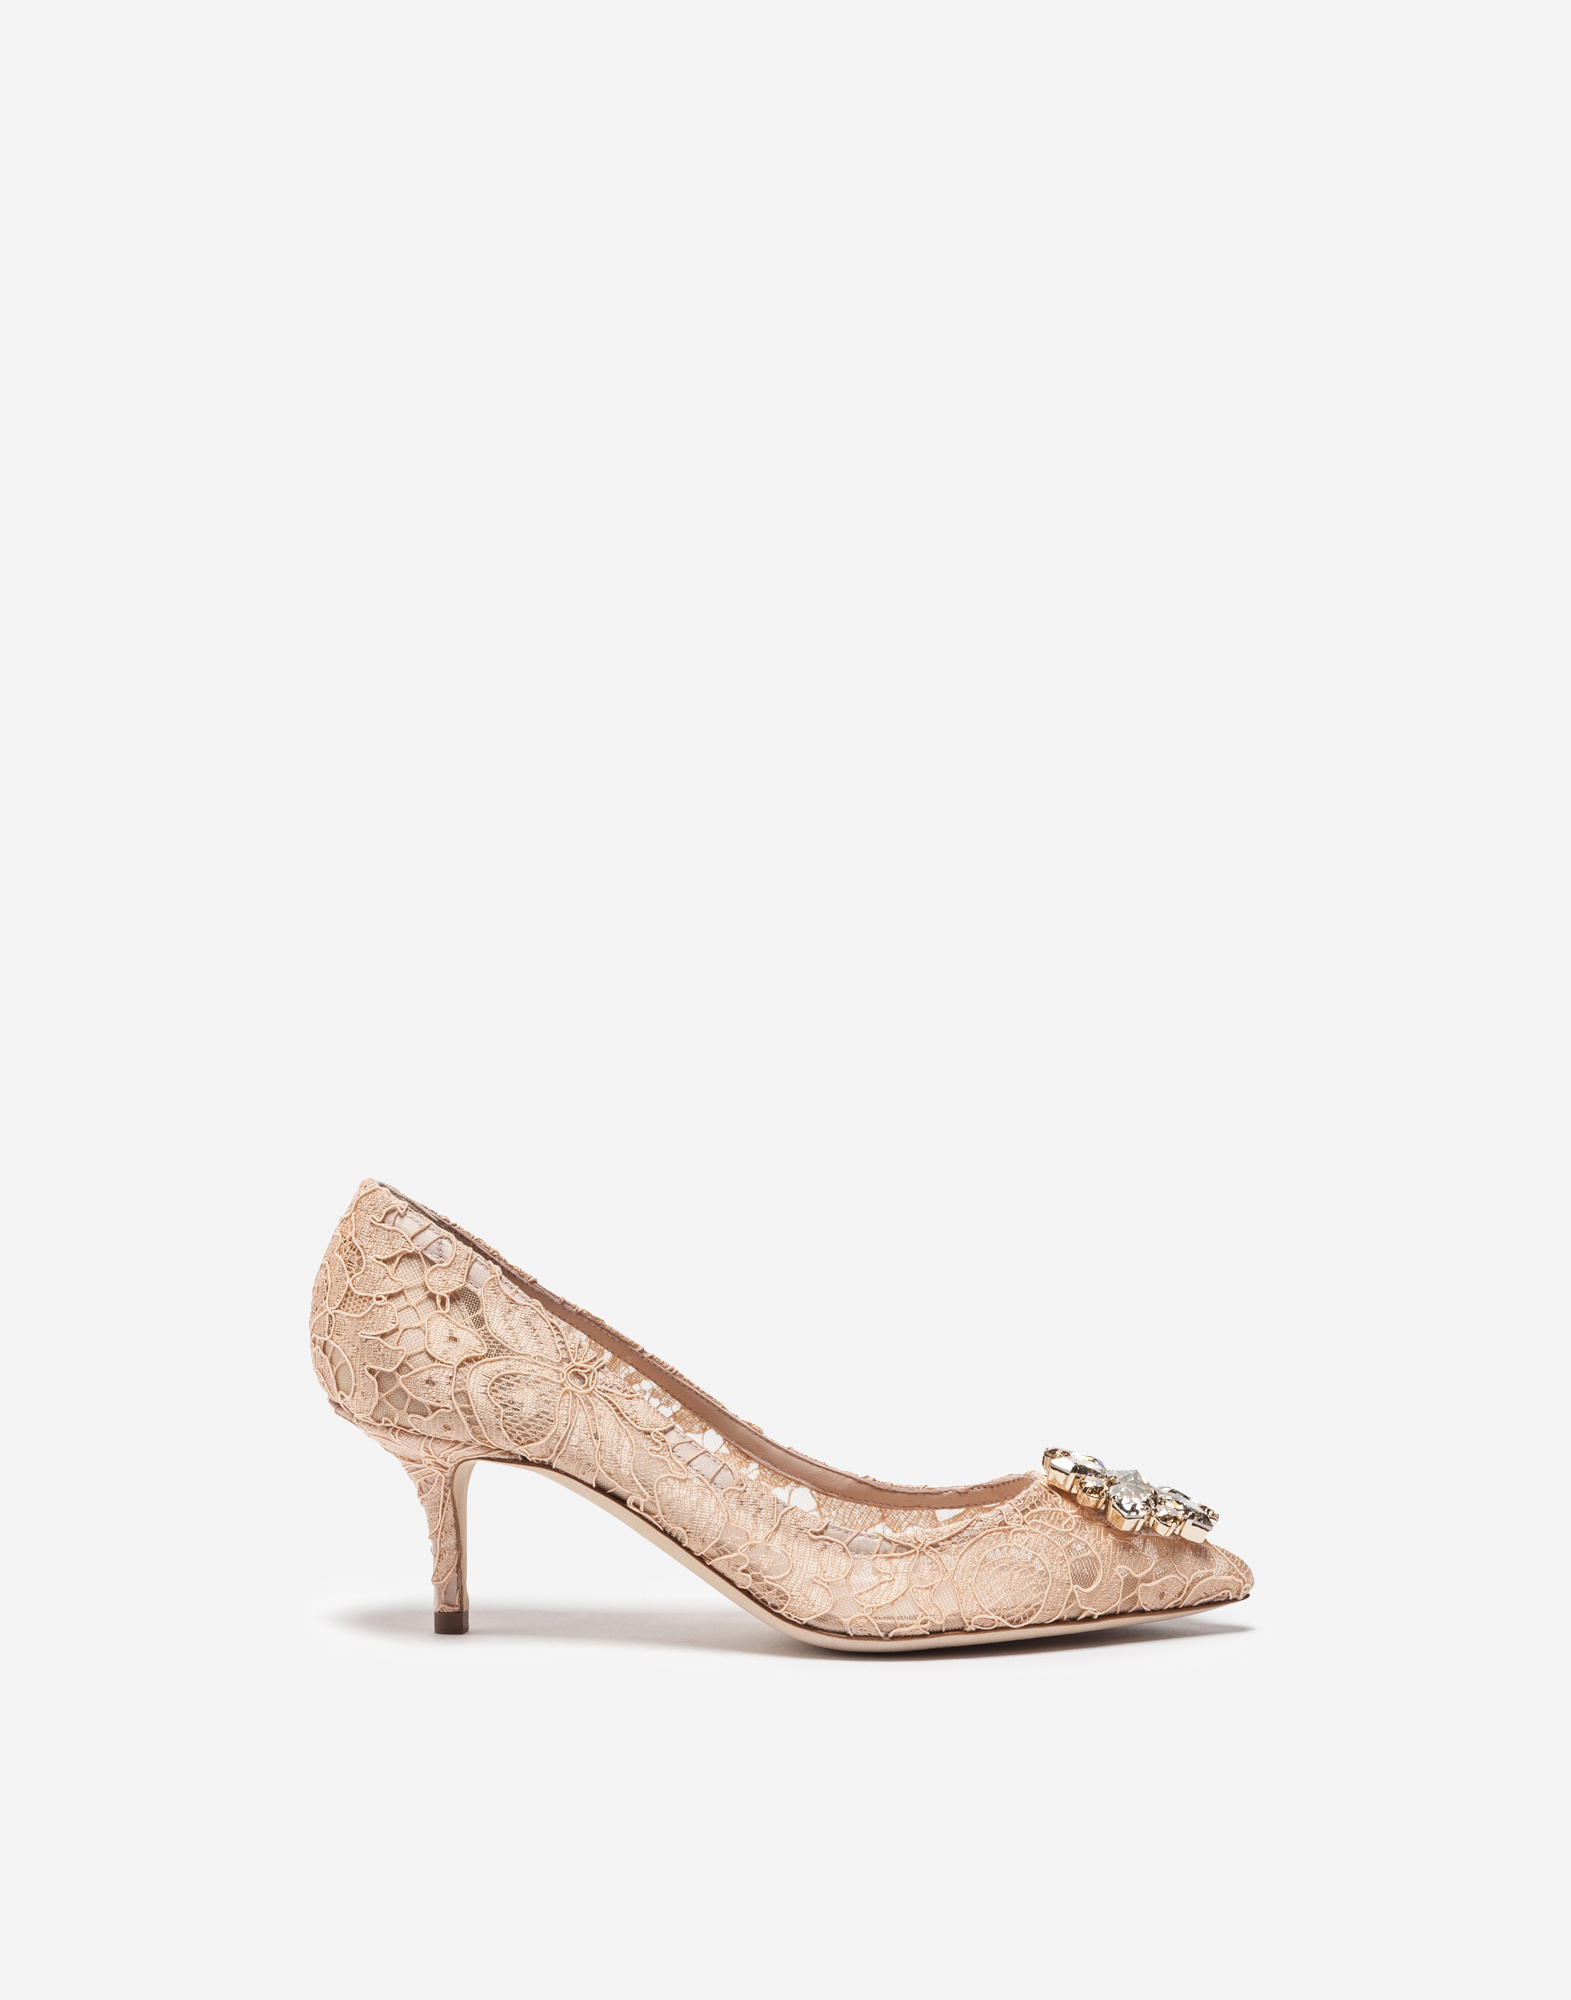 Lace rainbow pumps with brooch detailing in Pink